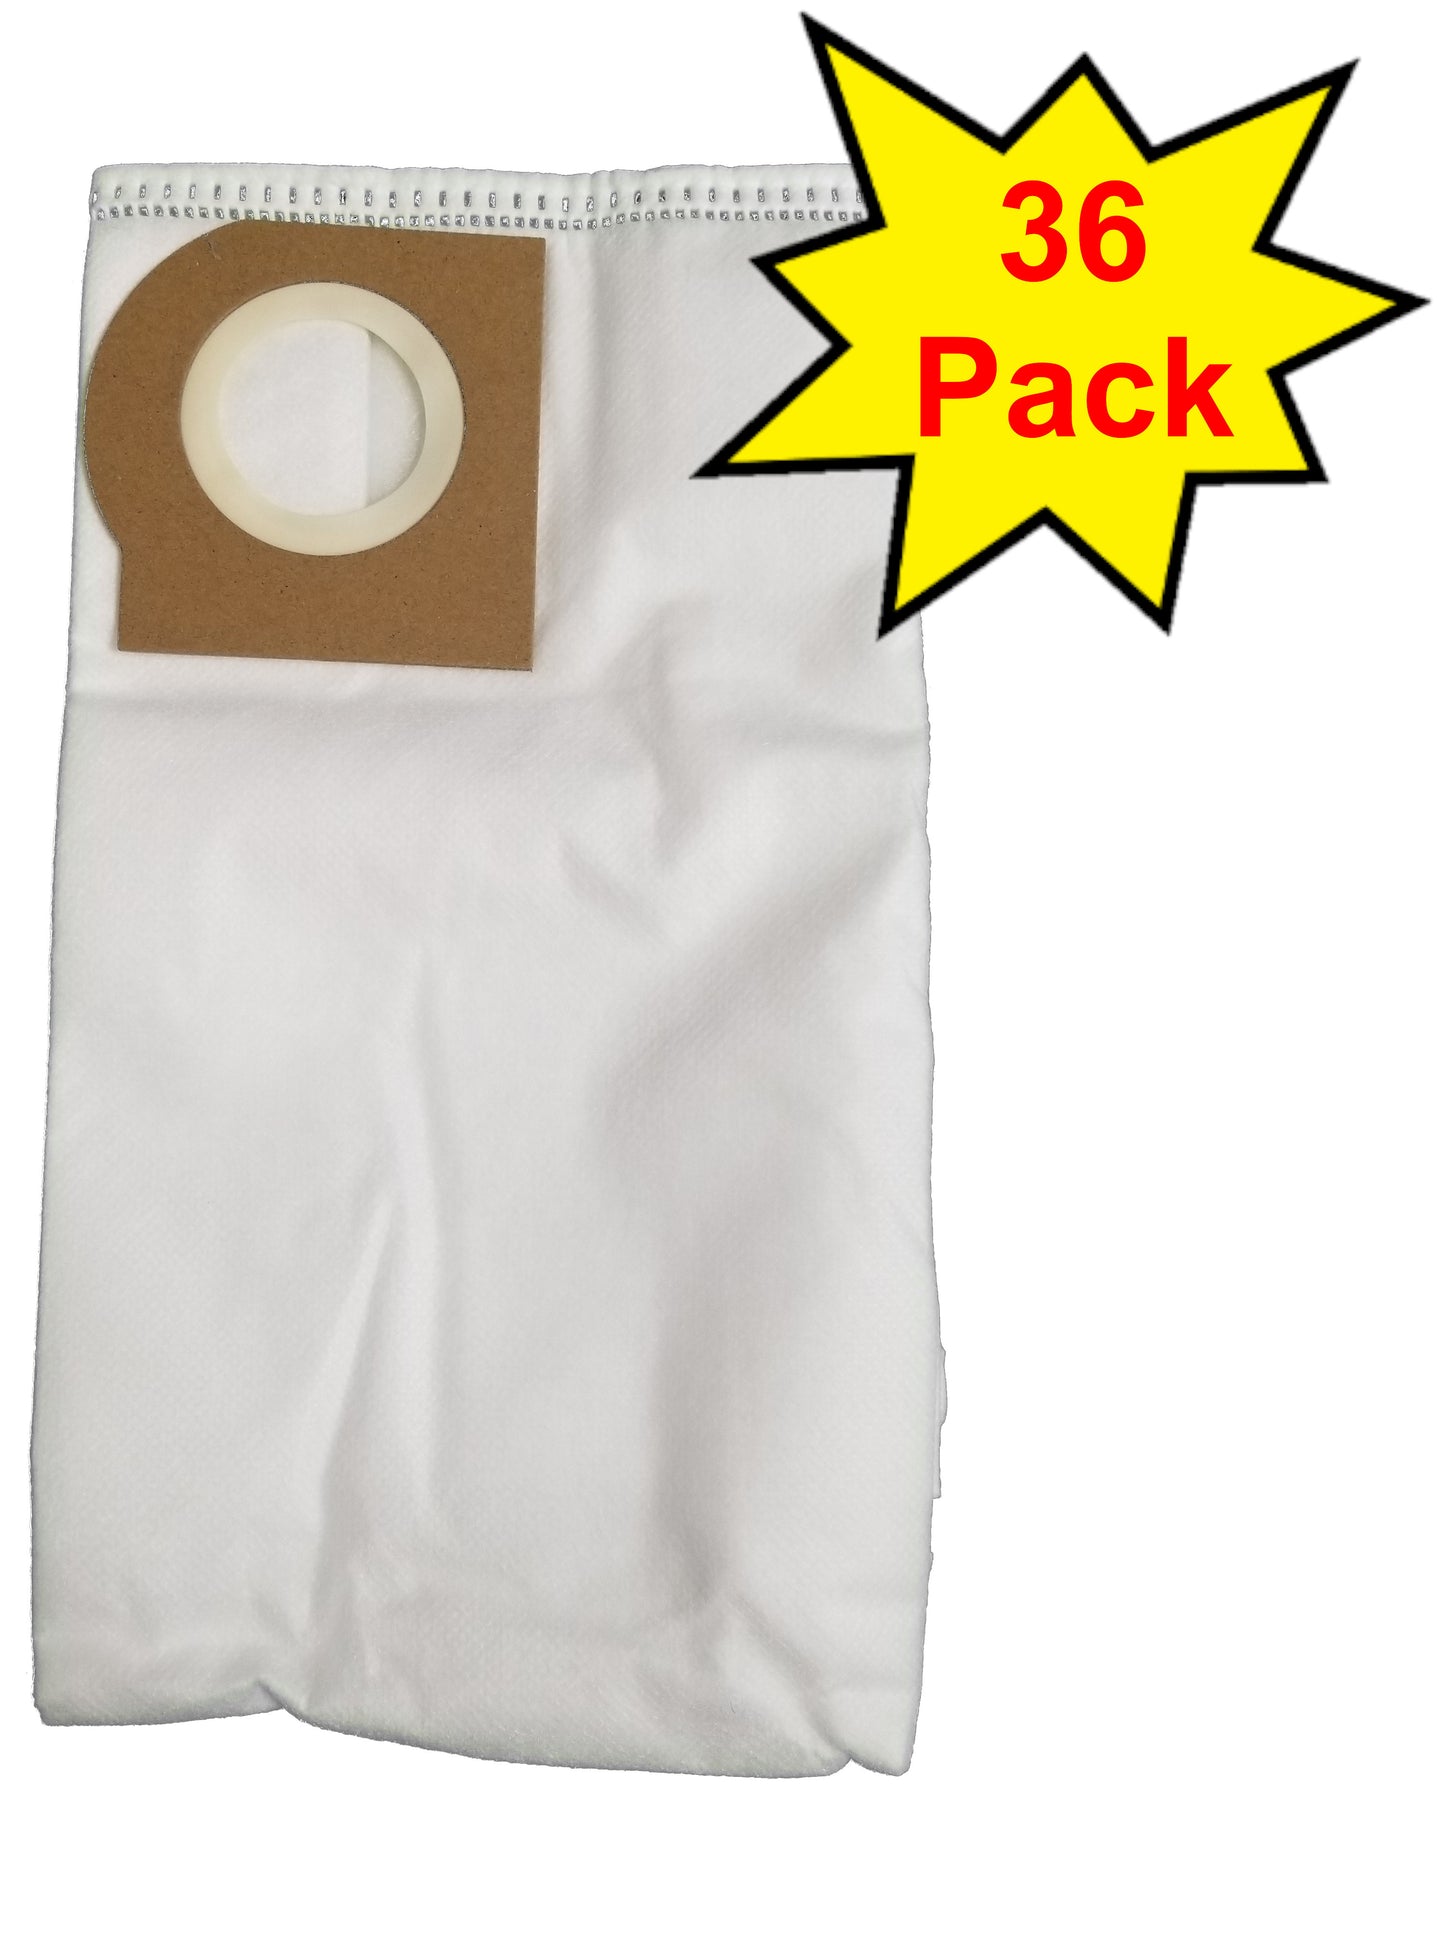 Supervacuums Type W Standard HEPA Vacuum Bags for Riccar Brilliance Vacuums Cleaners